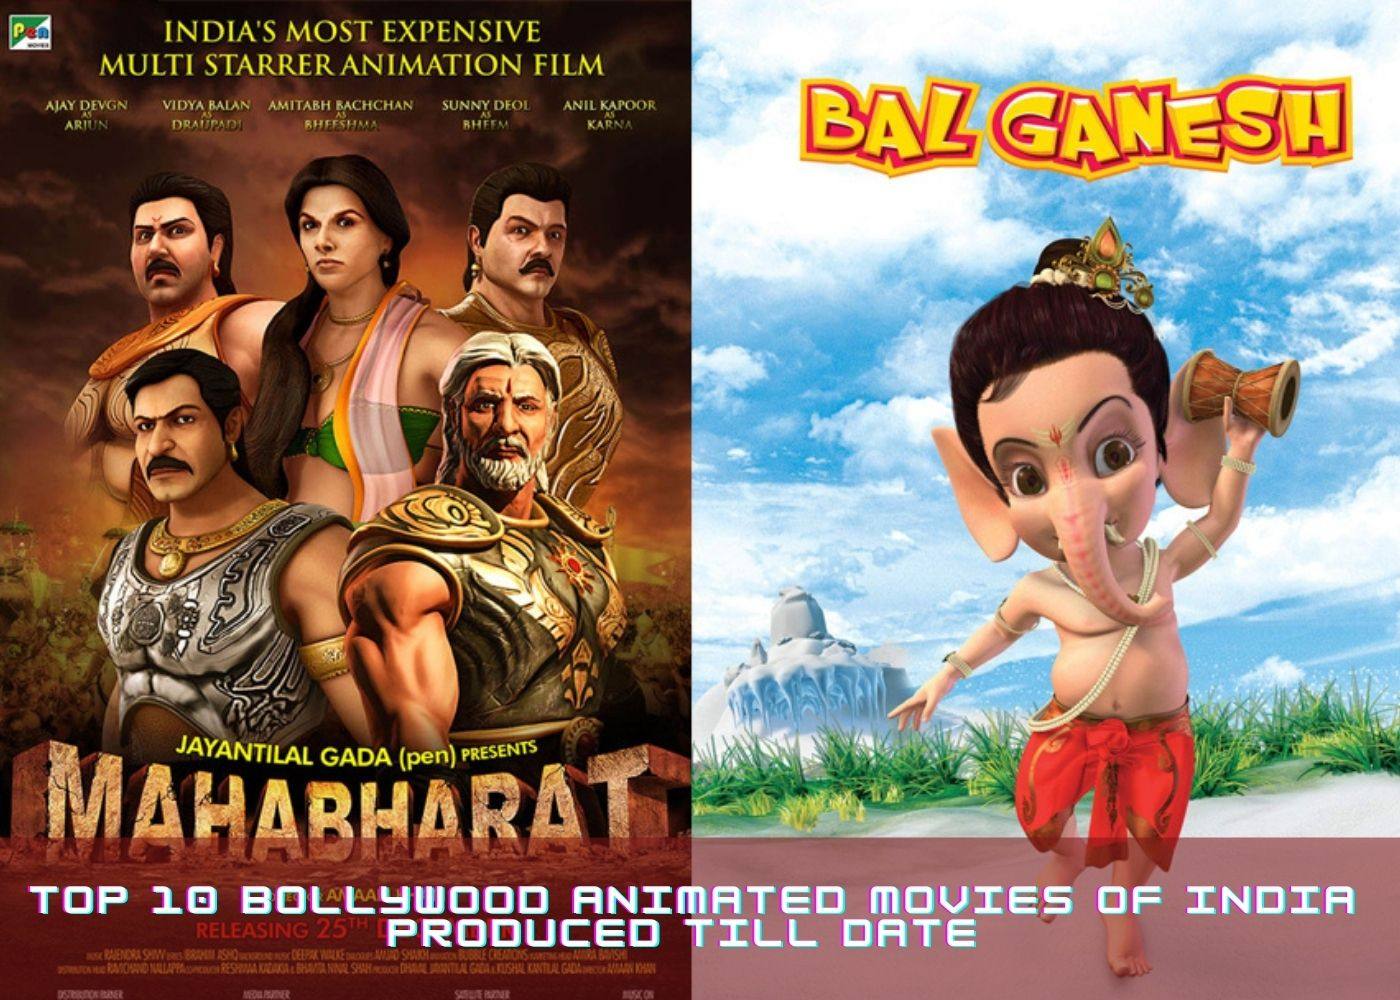 chris bottorf recommends Hollywood Animated Movies In Hindi